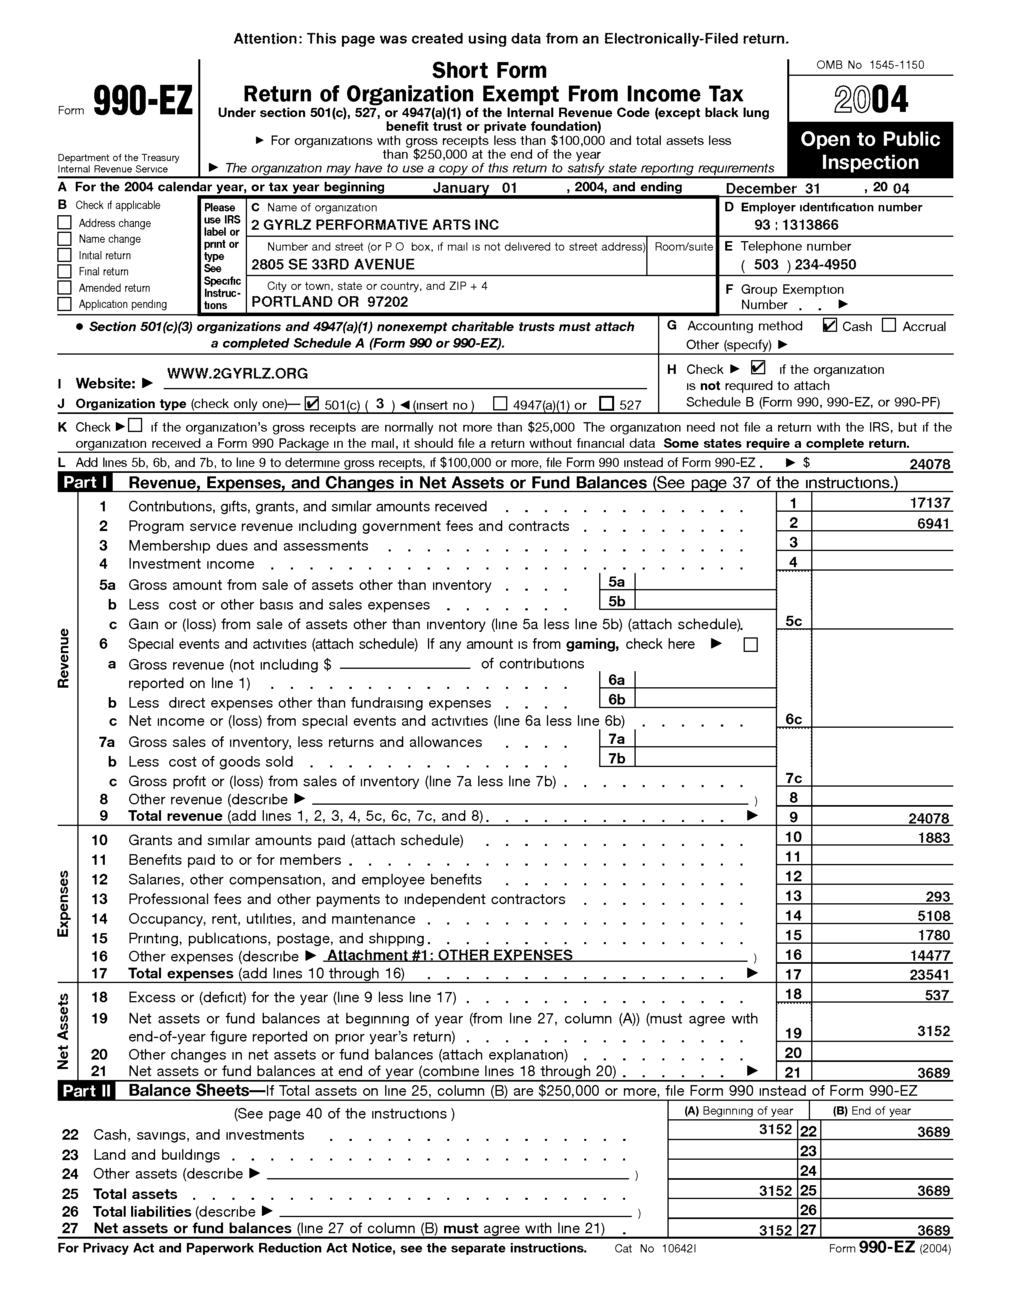 Short Form Return of Organization Exempt From Income Tax OMB No 1545-1150 Form 990 -EZ Under section 501(c ), 527, or 4947( a)(1) of the Internal Revenue Code (except black lung 2004 benefit trust or